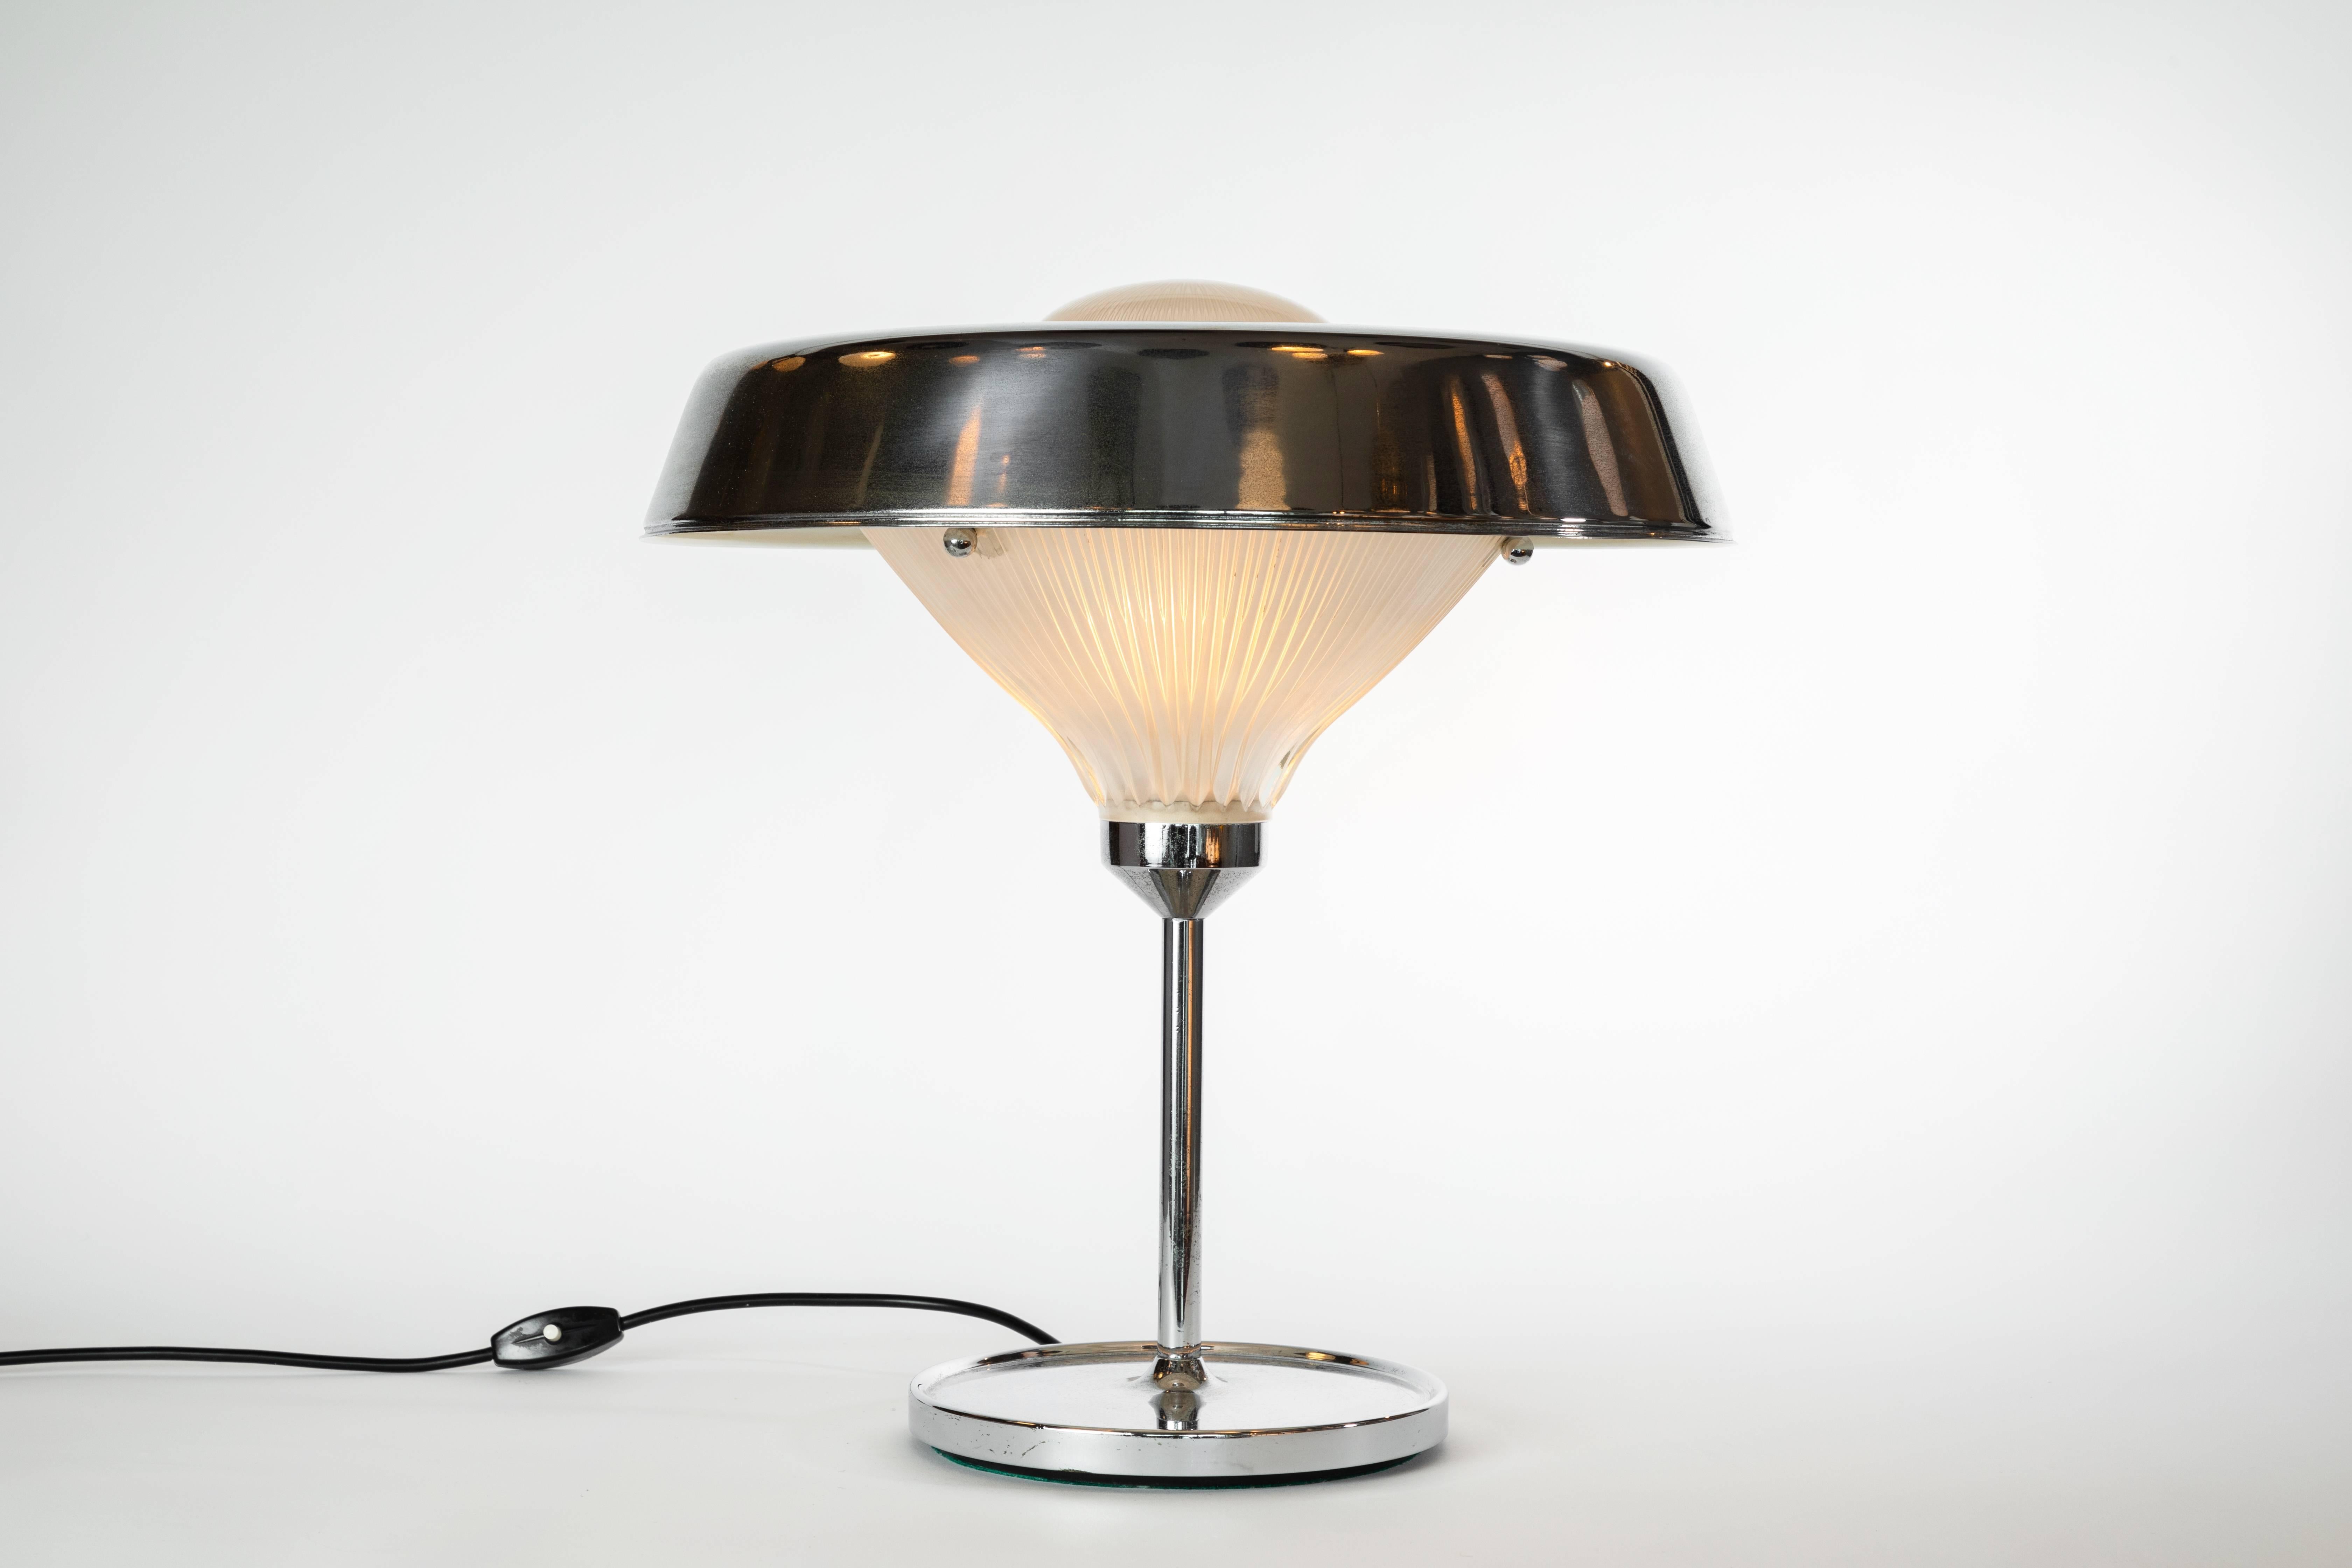 B.B.P.R 'Ro' table lamp for Artemide. Executed in chromed brass and pressed glass and designed by Lodovico Barbariano di Belgiojoso, Enrico Peressutti, Ernesto N. Roger for Artemide, Italy, circa 1962.

Not UL listed, but available upon request.